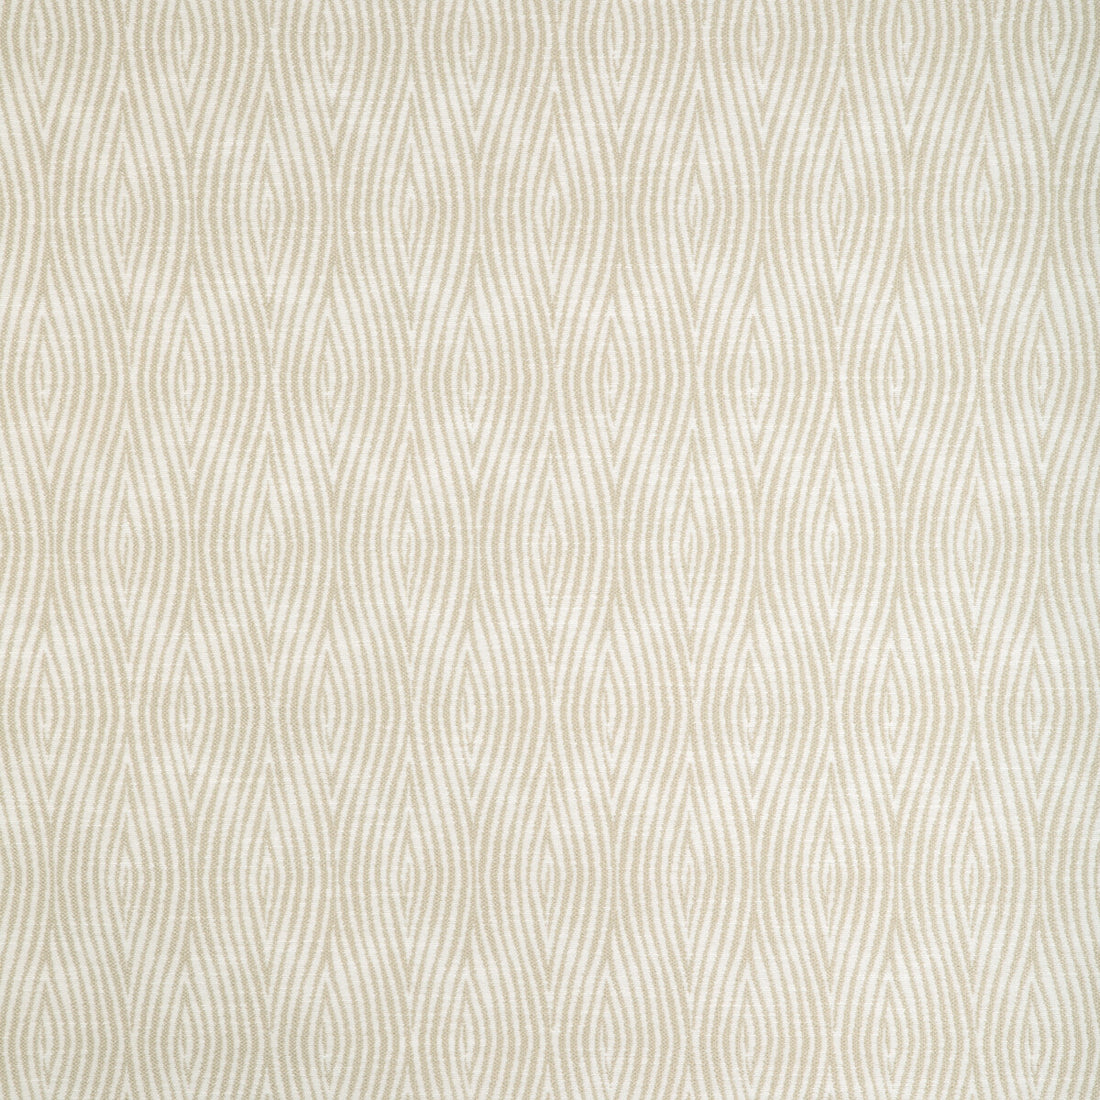 Vertical Motion fabric in chablis color - pattern 37059.16.0 - by Kravet Design in the Thom Filicia Latitude collection